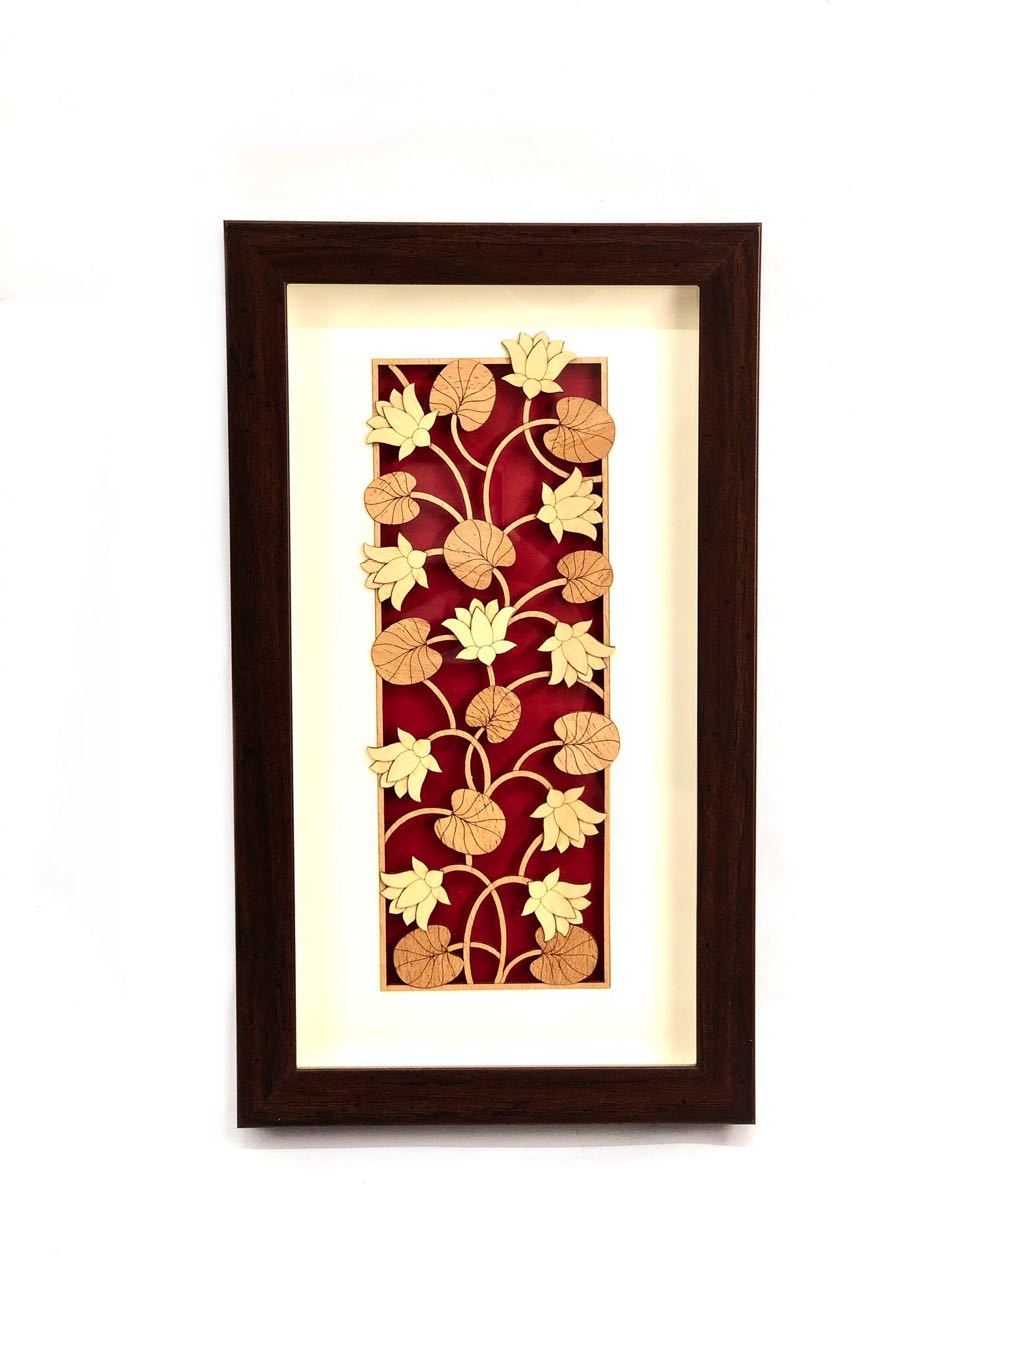 Floral Theme Based On Lovely Red Background Hanging Frames By Tamrapatra